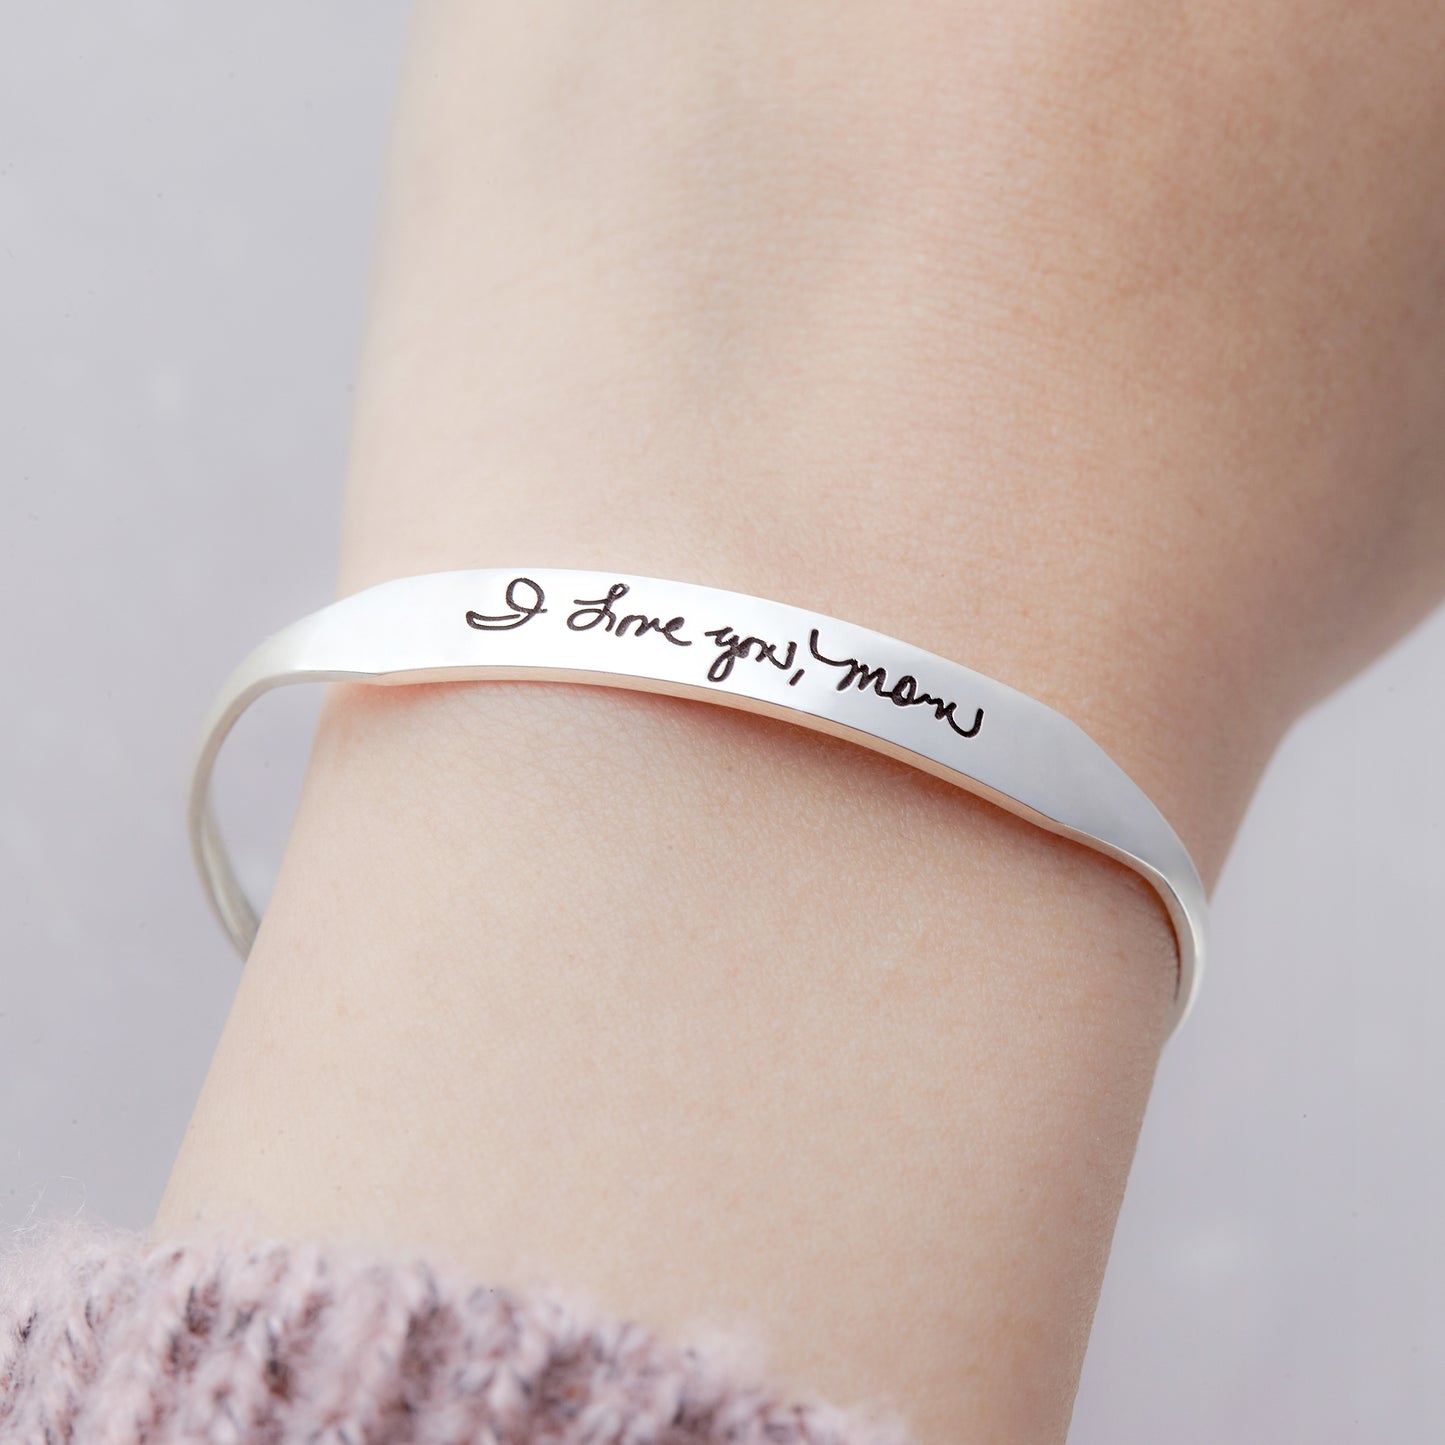 Handwritten Bracelet Memorial Handwriting Jewelry, Adult, Female, in Colors Gold, Rose Gold, or Silver